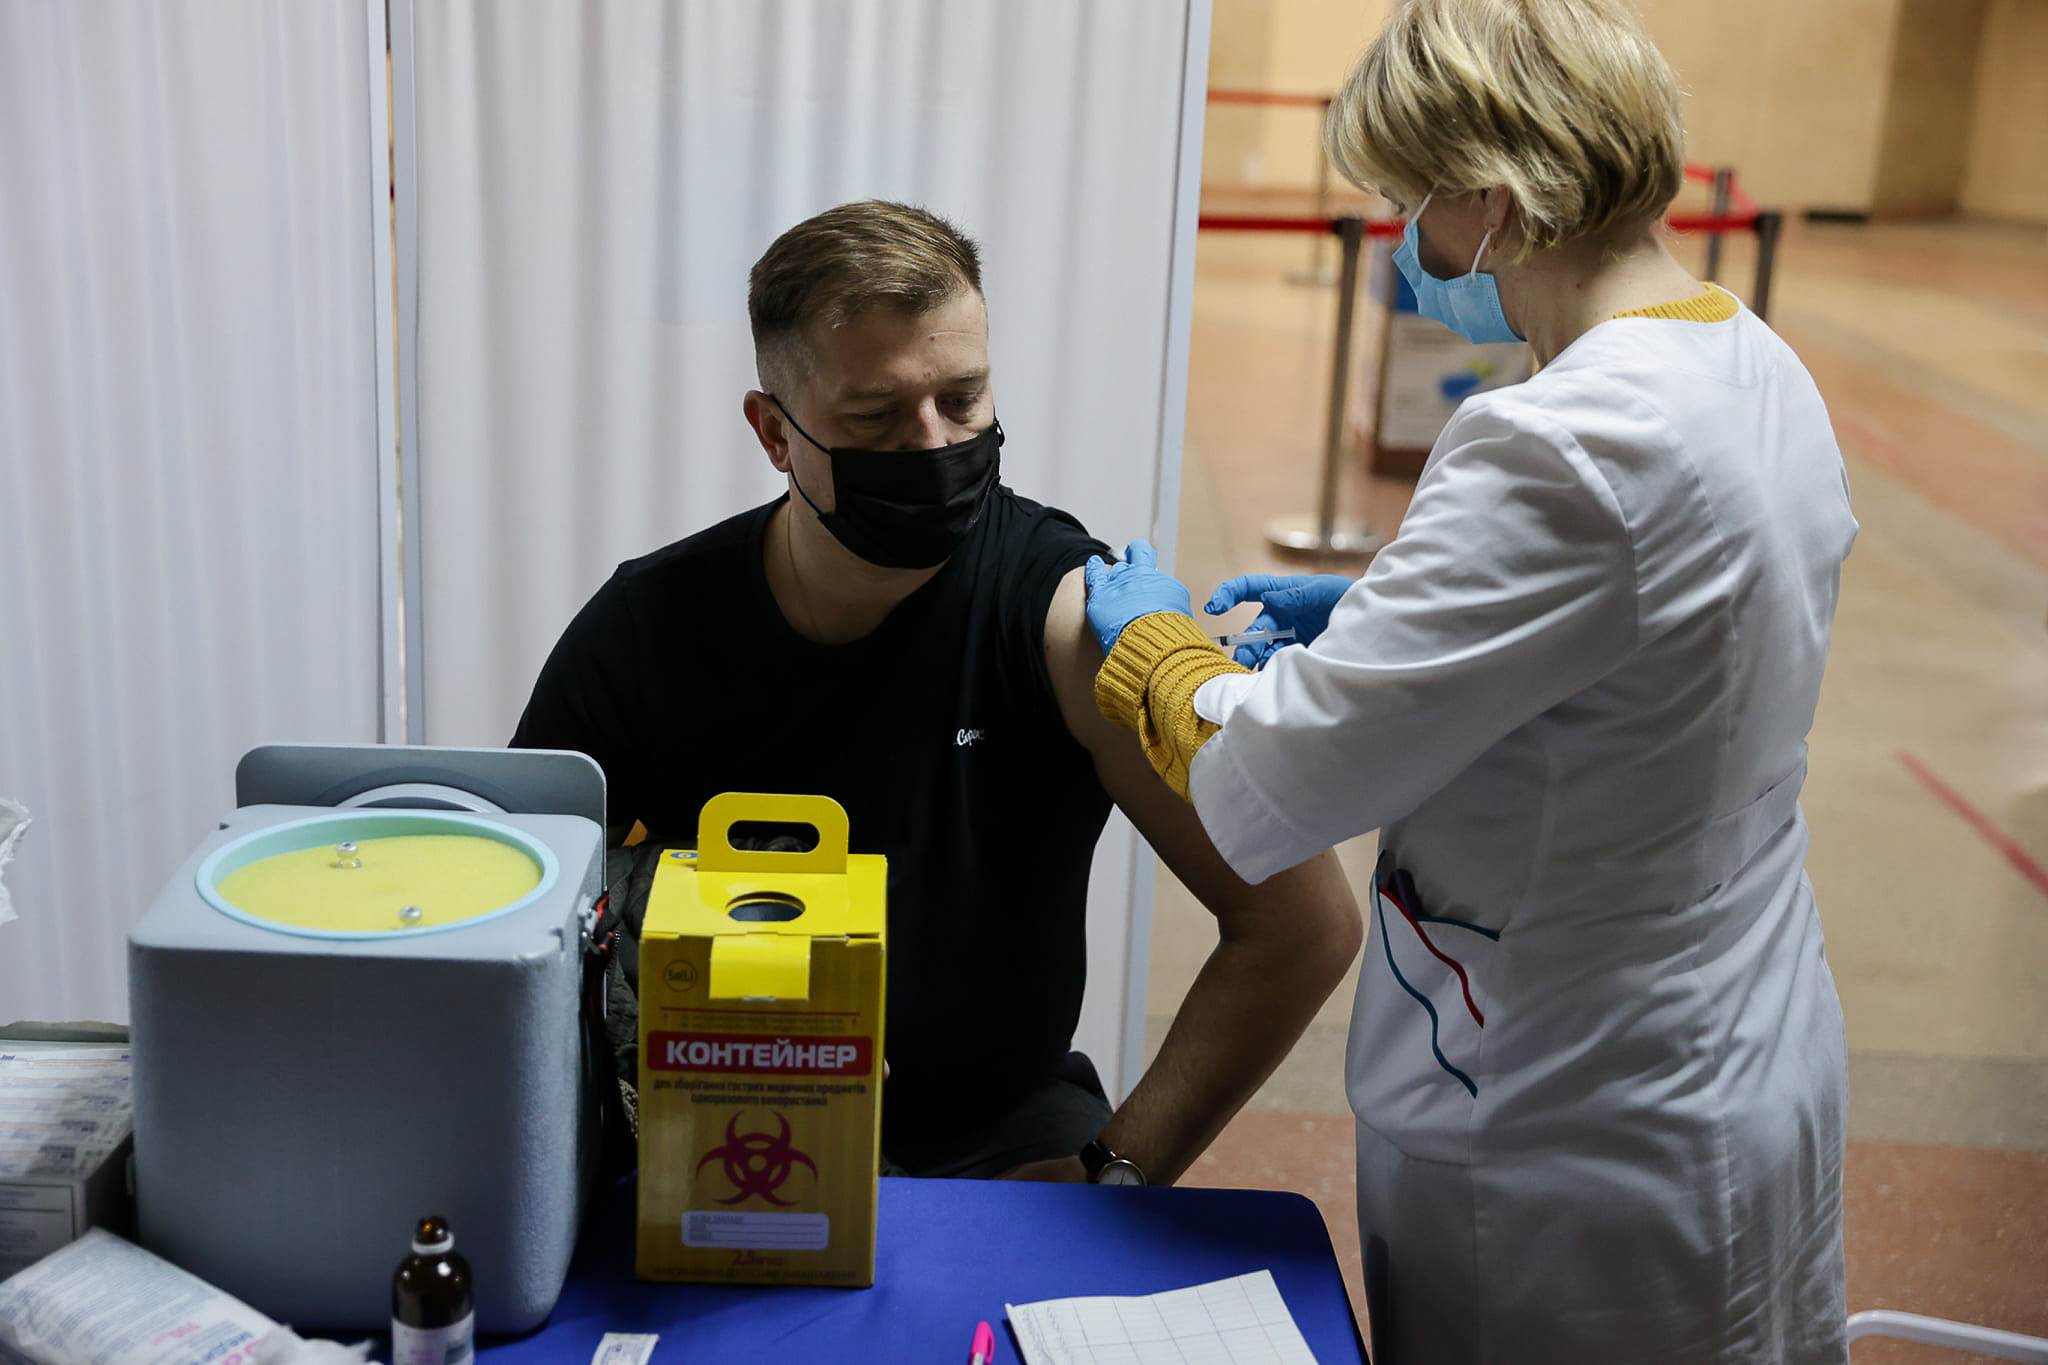 Health minister falsely claims Ukraine reached WHO's target of vaccinating 40% of population